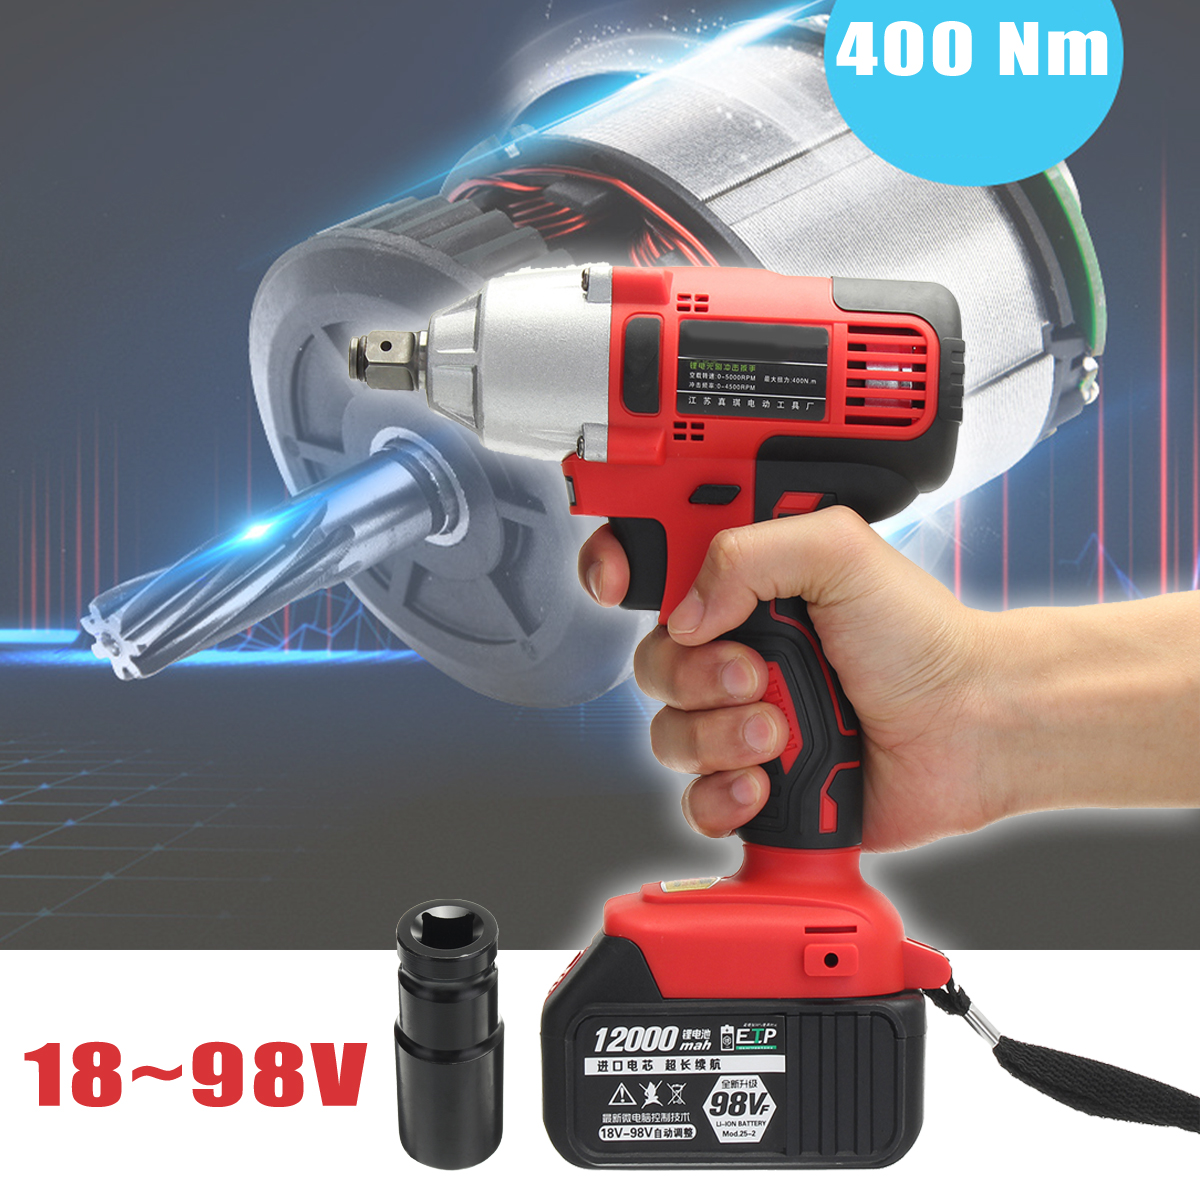 Electric-Wrench-98V-Lithium-Ion-Cordless-Impact-Wrench-Brushless-Motor-Power-Wrench-Tools-1310565-3